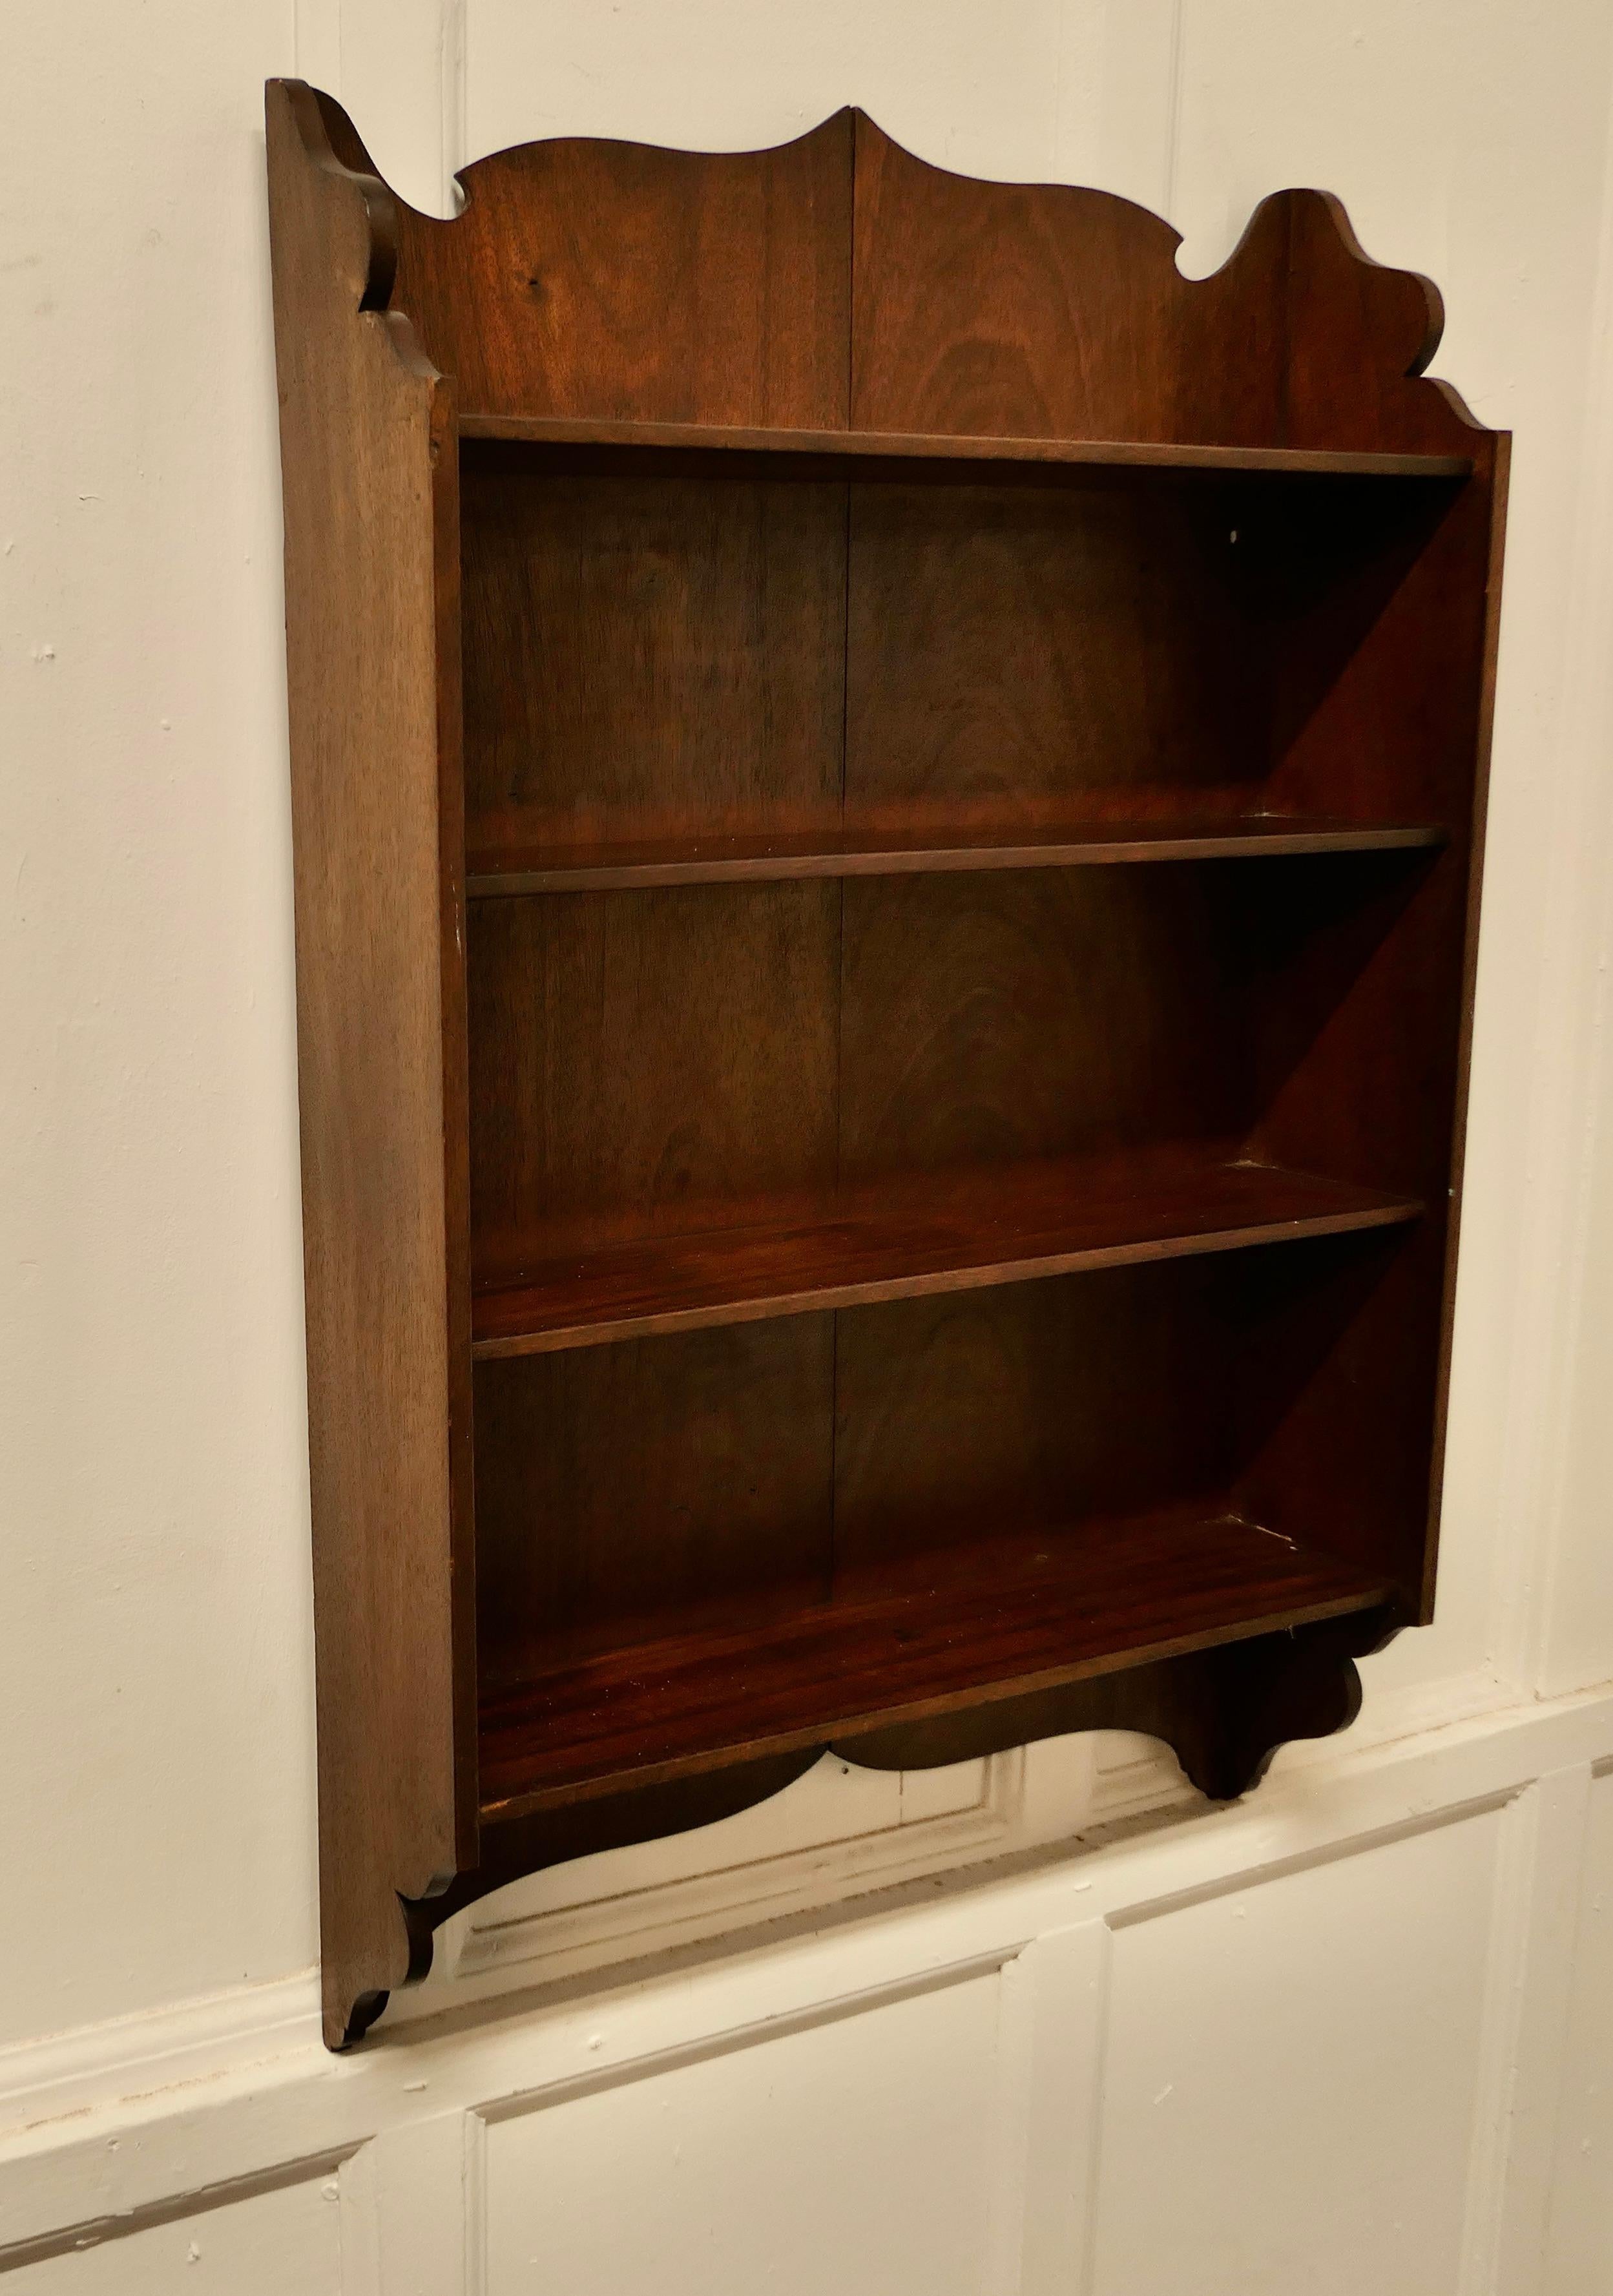 Wall hanging shelf.

This charming little shelf unit has a solid back, the shelf has a scalloped top and bottom edge and there are 4 shelves.

The shelf is in good condition and would work well in many room designs 
The shelf is 16.5” deep, 29”